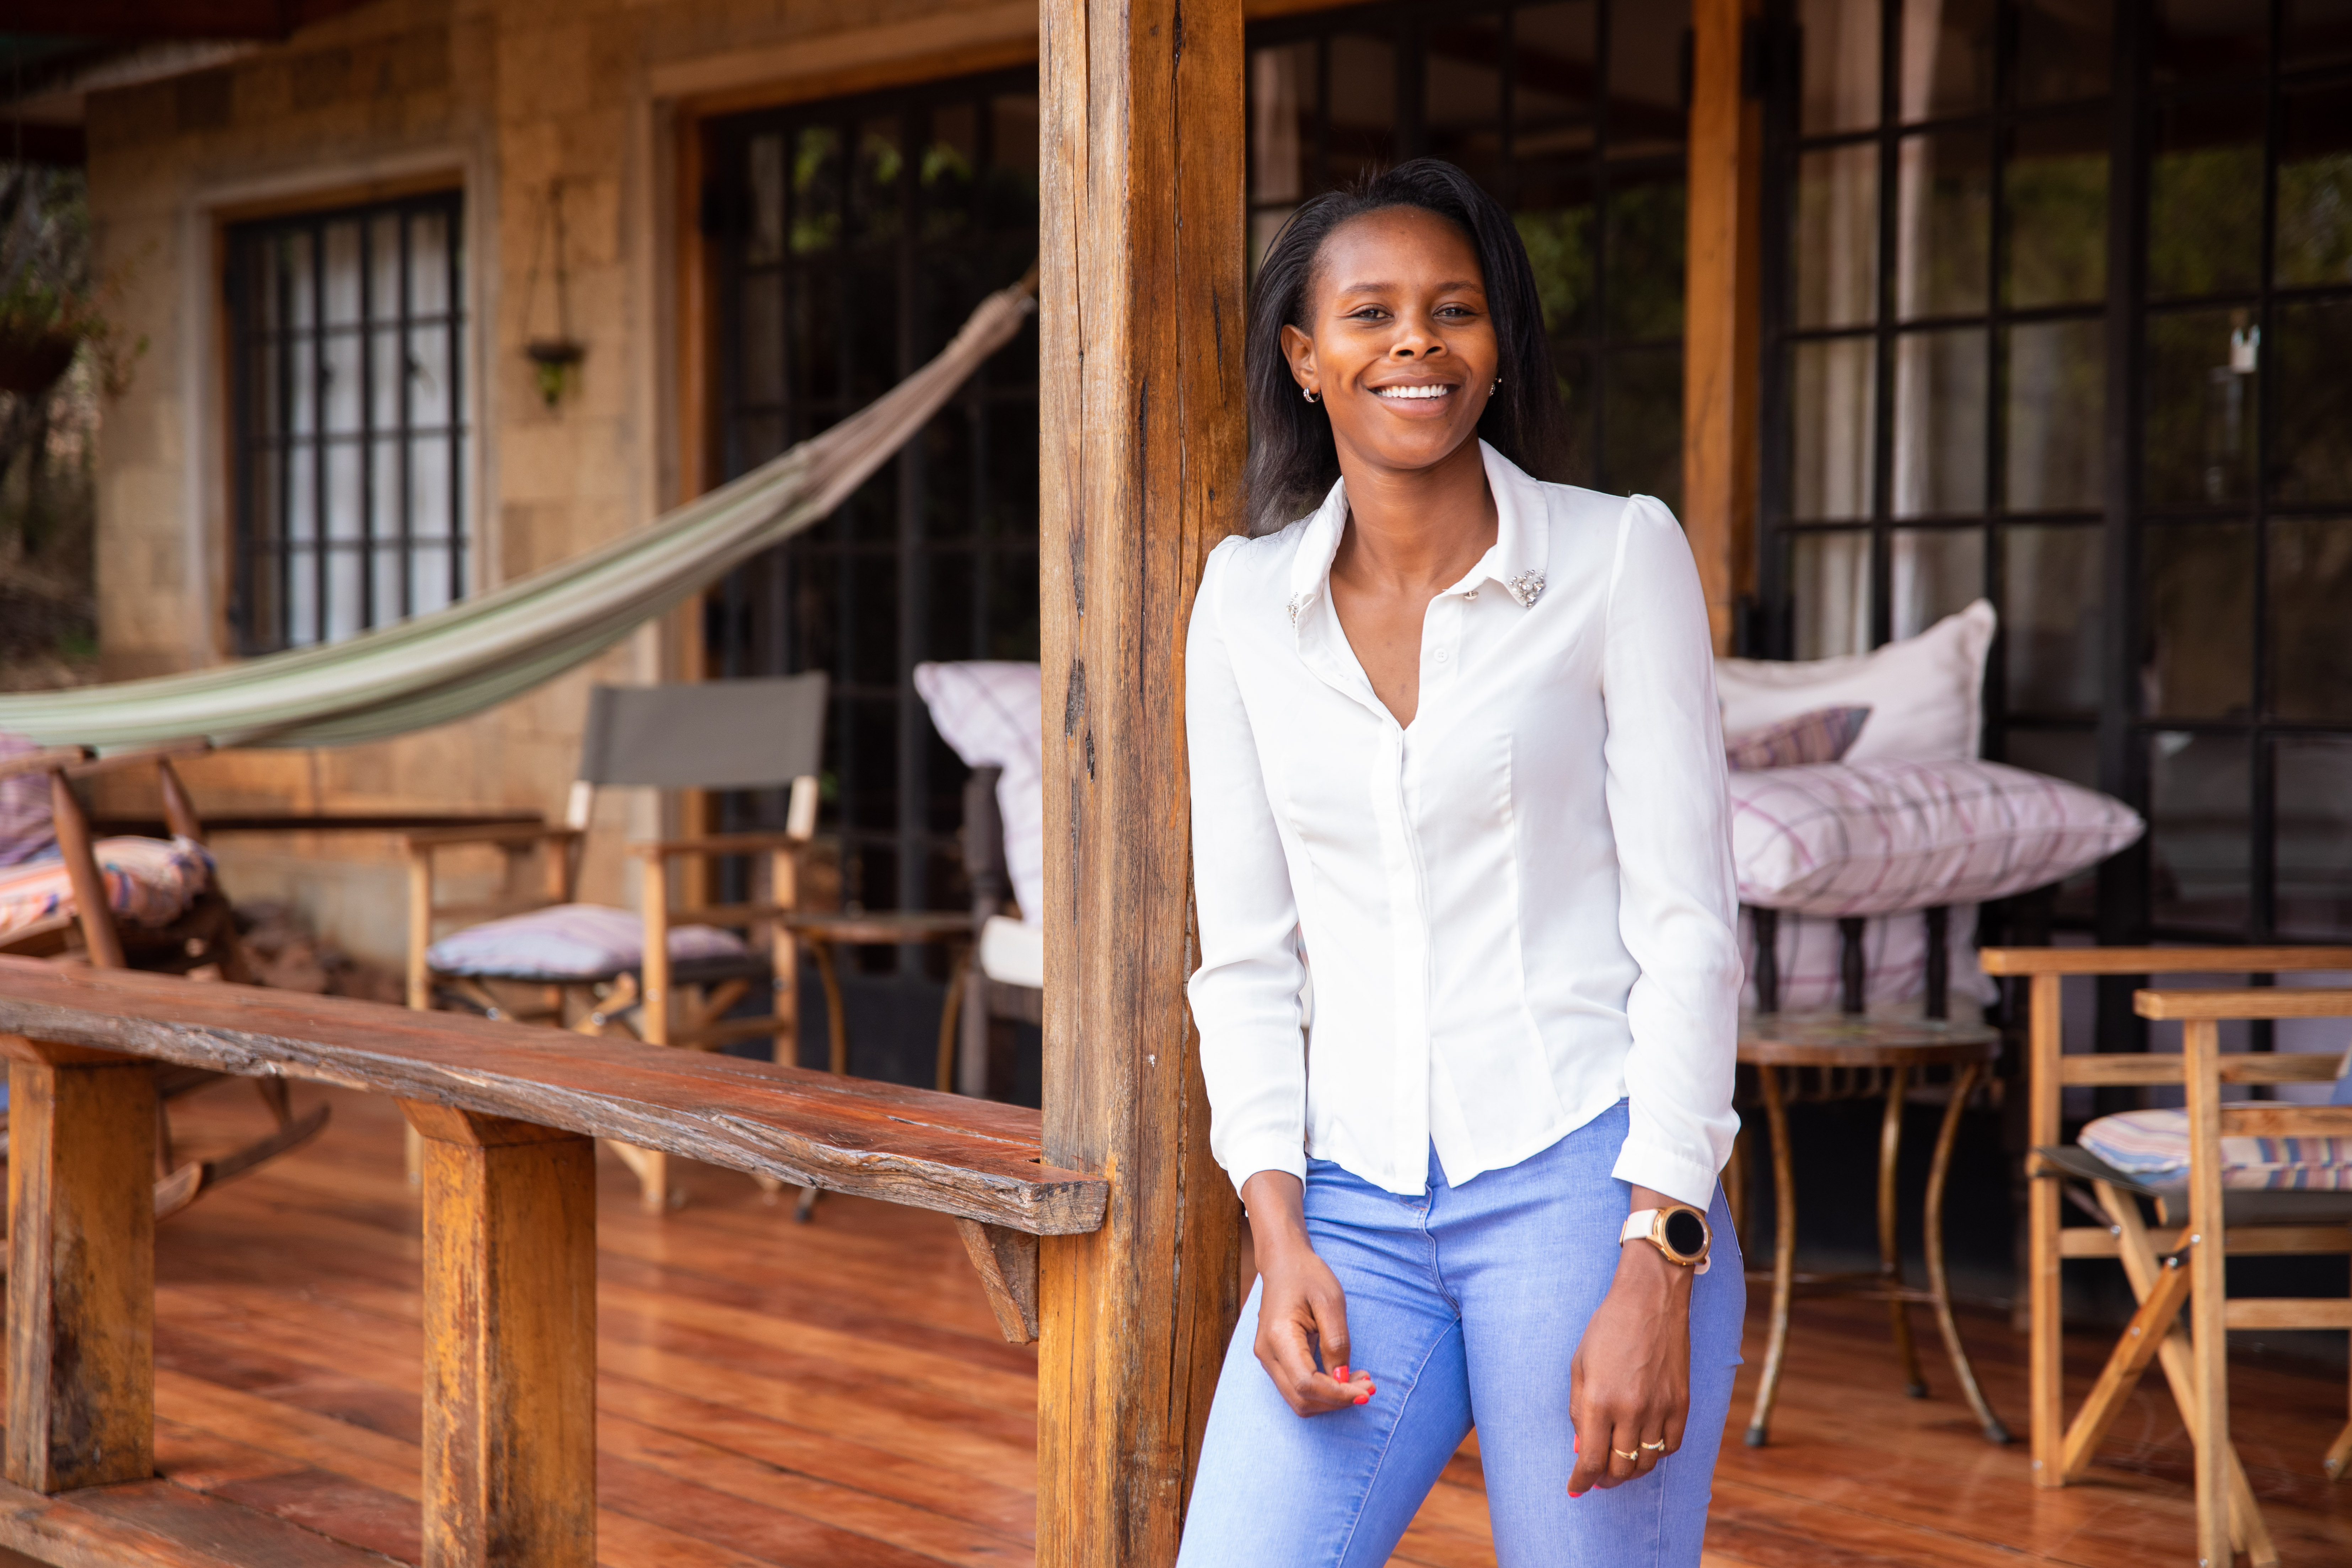 A woman in a white shirt and blue jeans leans against a wooden porch pillar, smiling with outdoor furniture behind her.